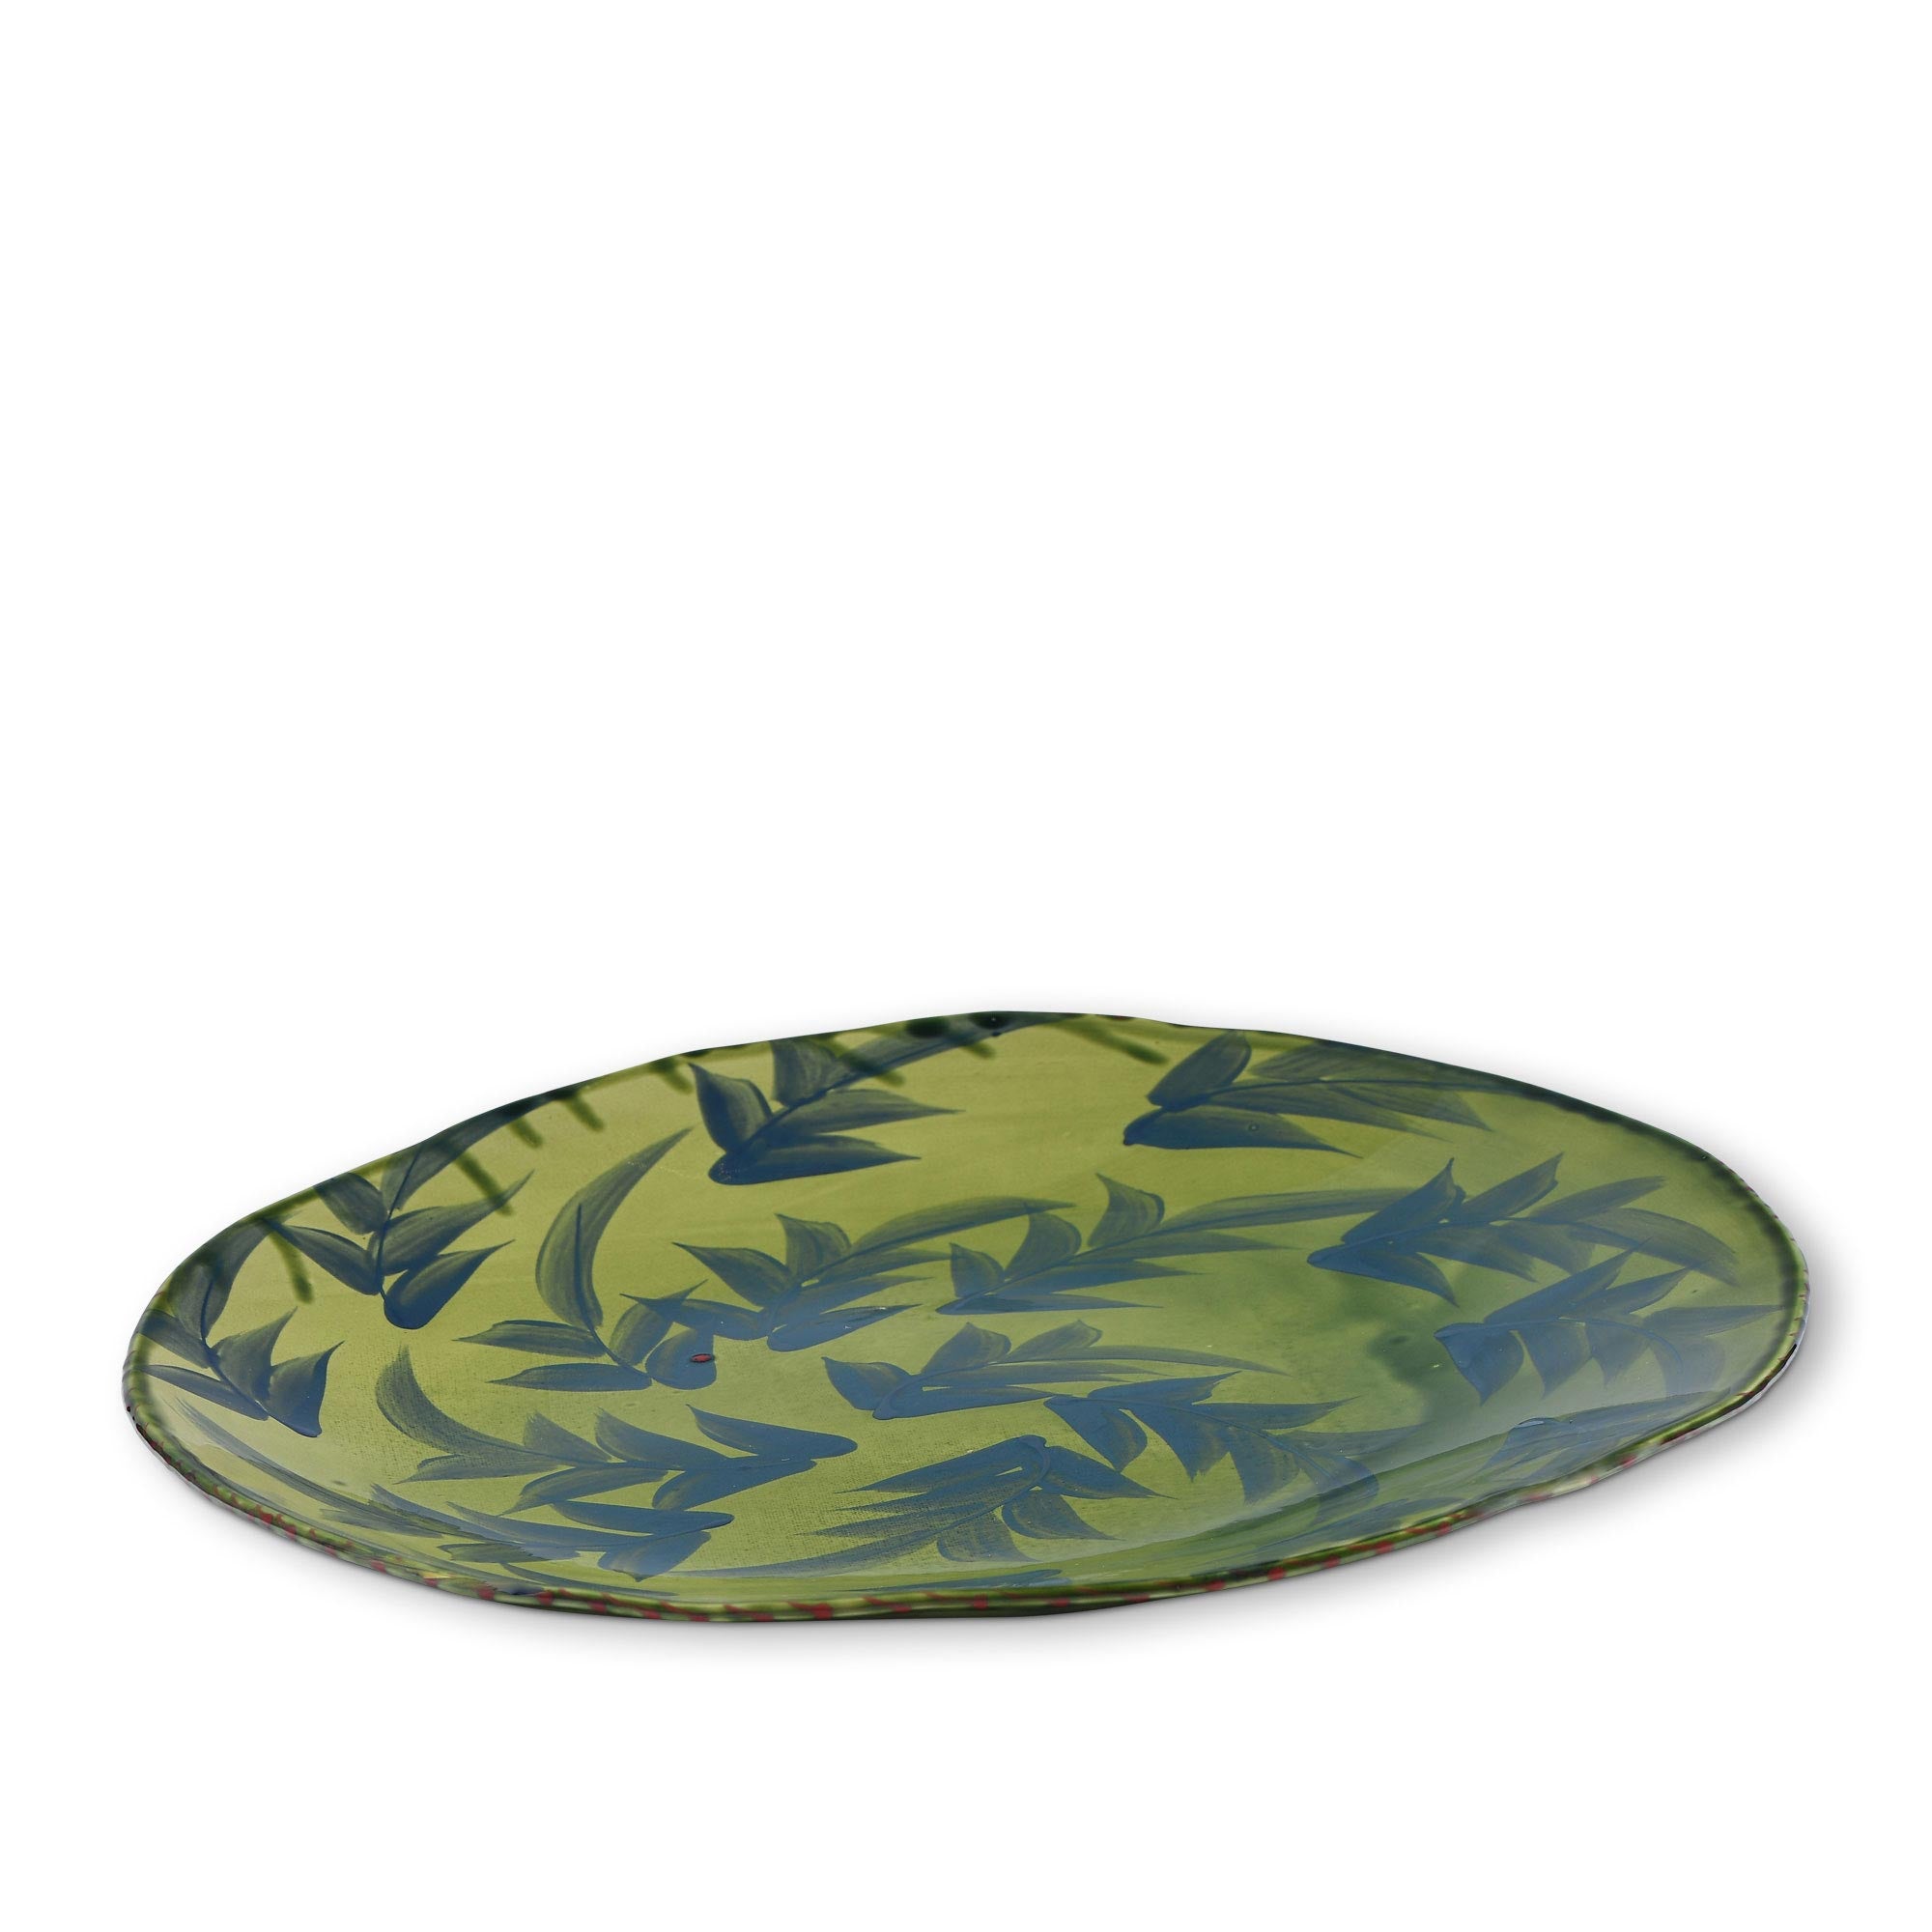 Ceramic%20Round%20Serving%20Dish%20With%20Blue%20Leaves%20Motifs%20on%20Green%20Background image 2